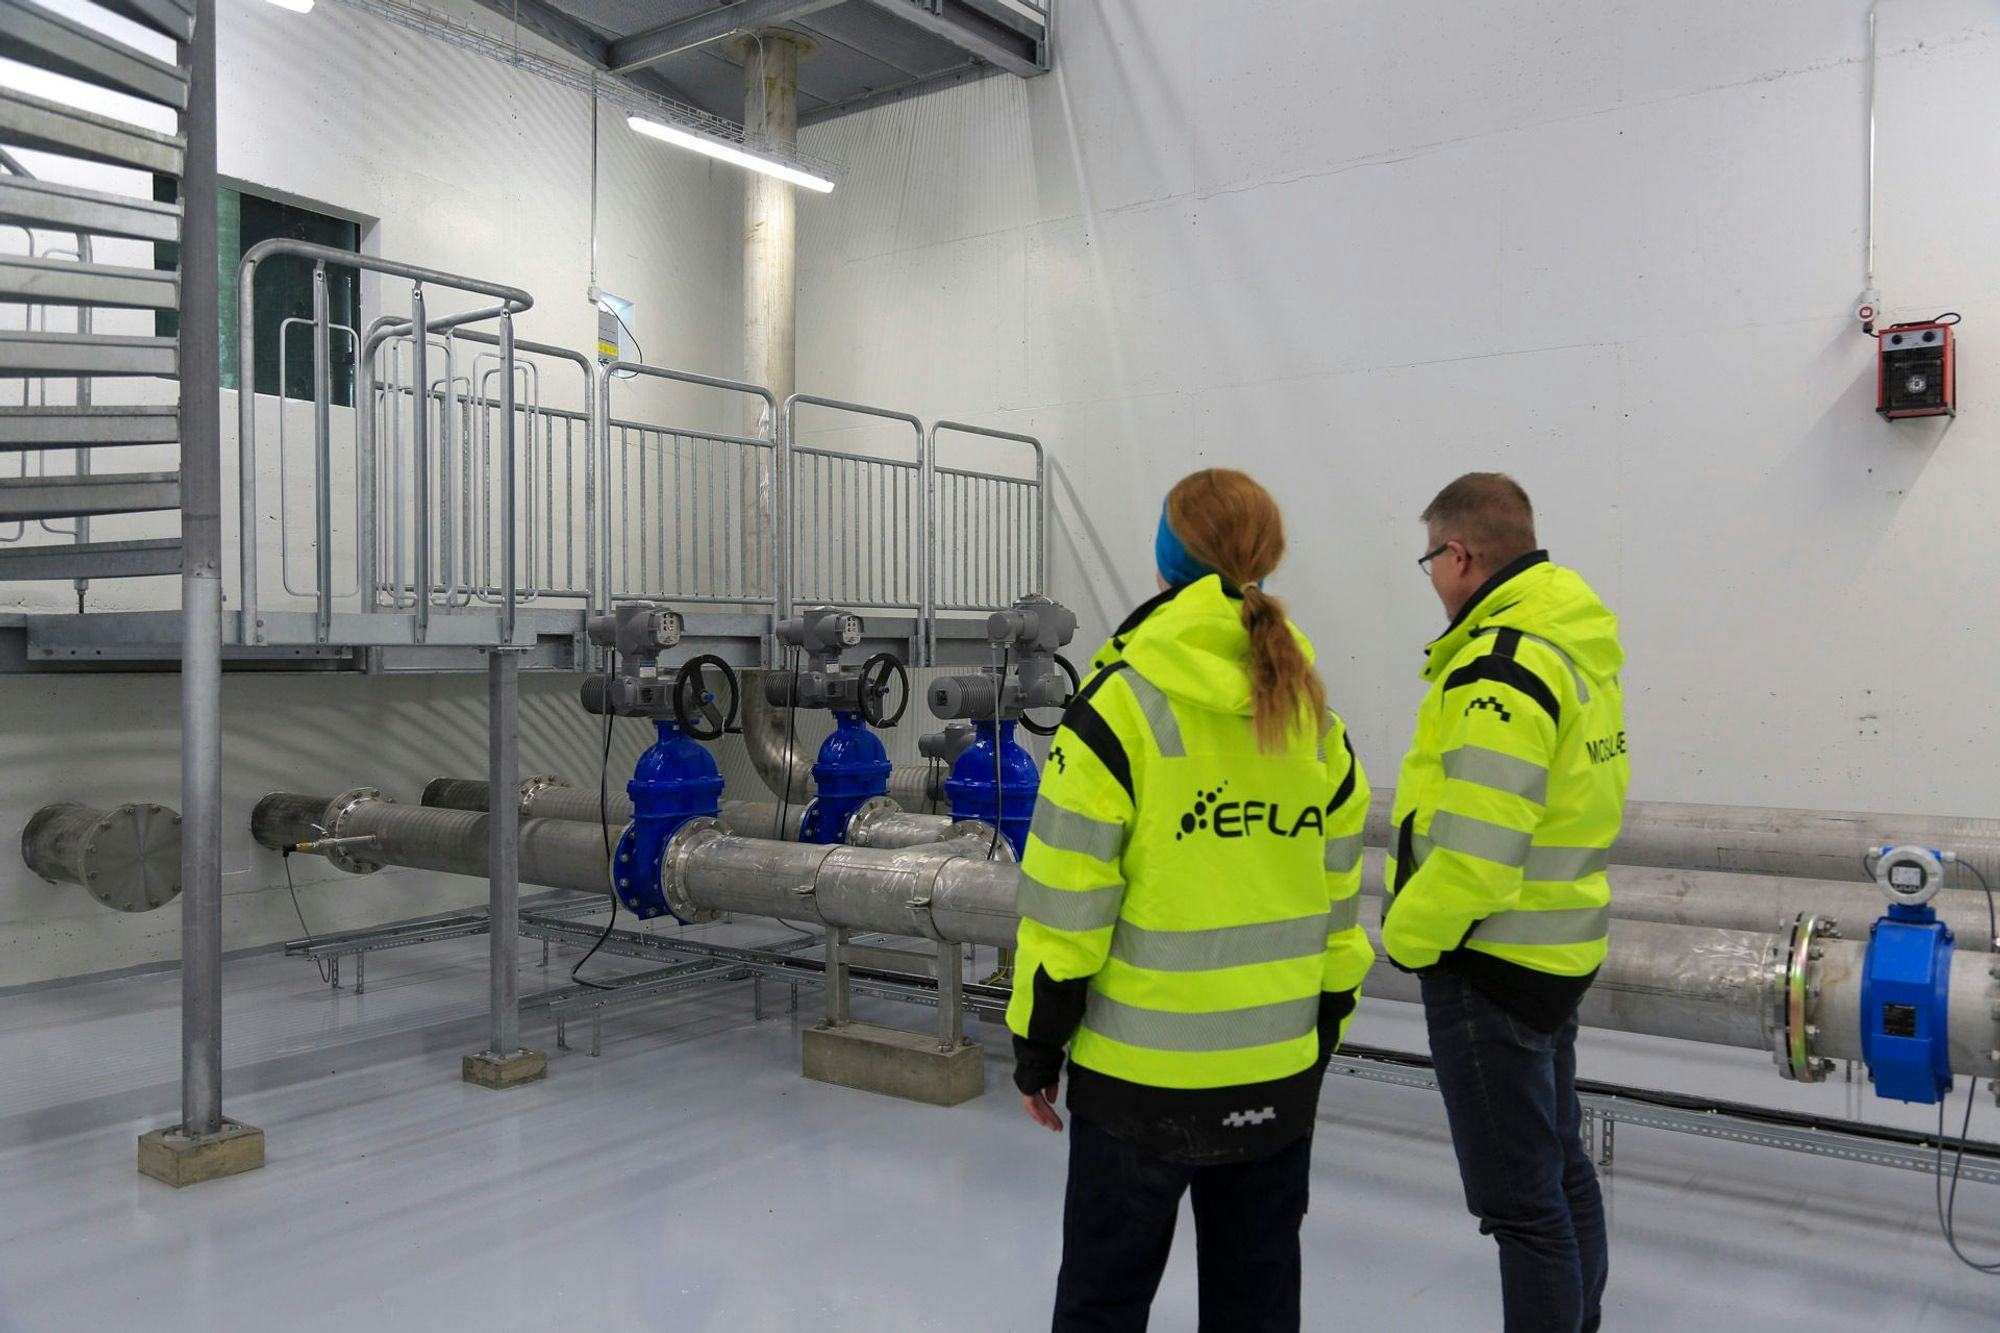 Two individuals in high visibility jacket inspecting industrial pipping and valves